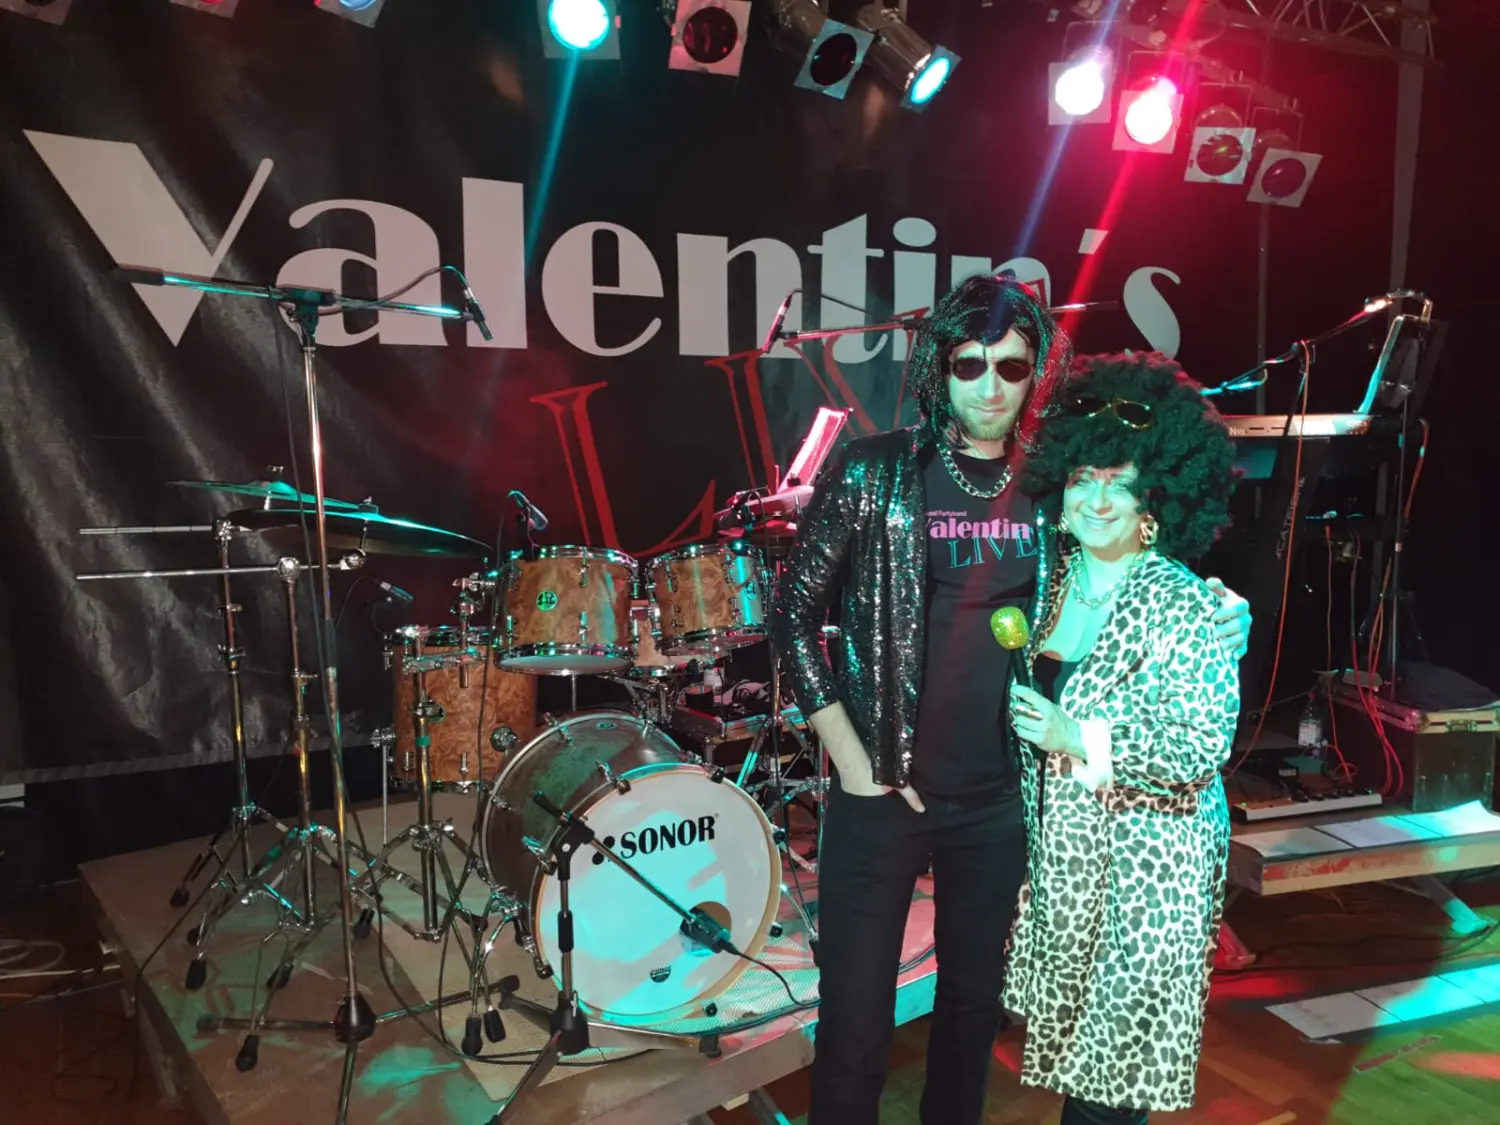 Valentin's Partyband